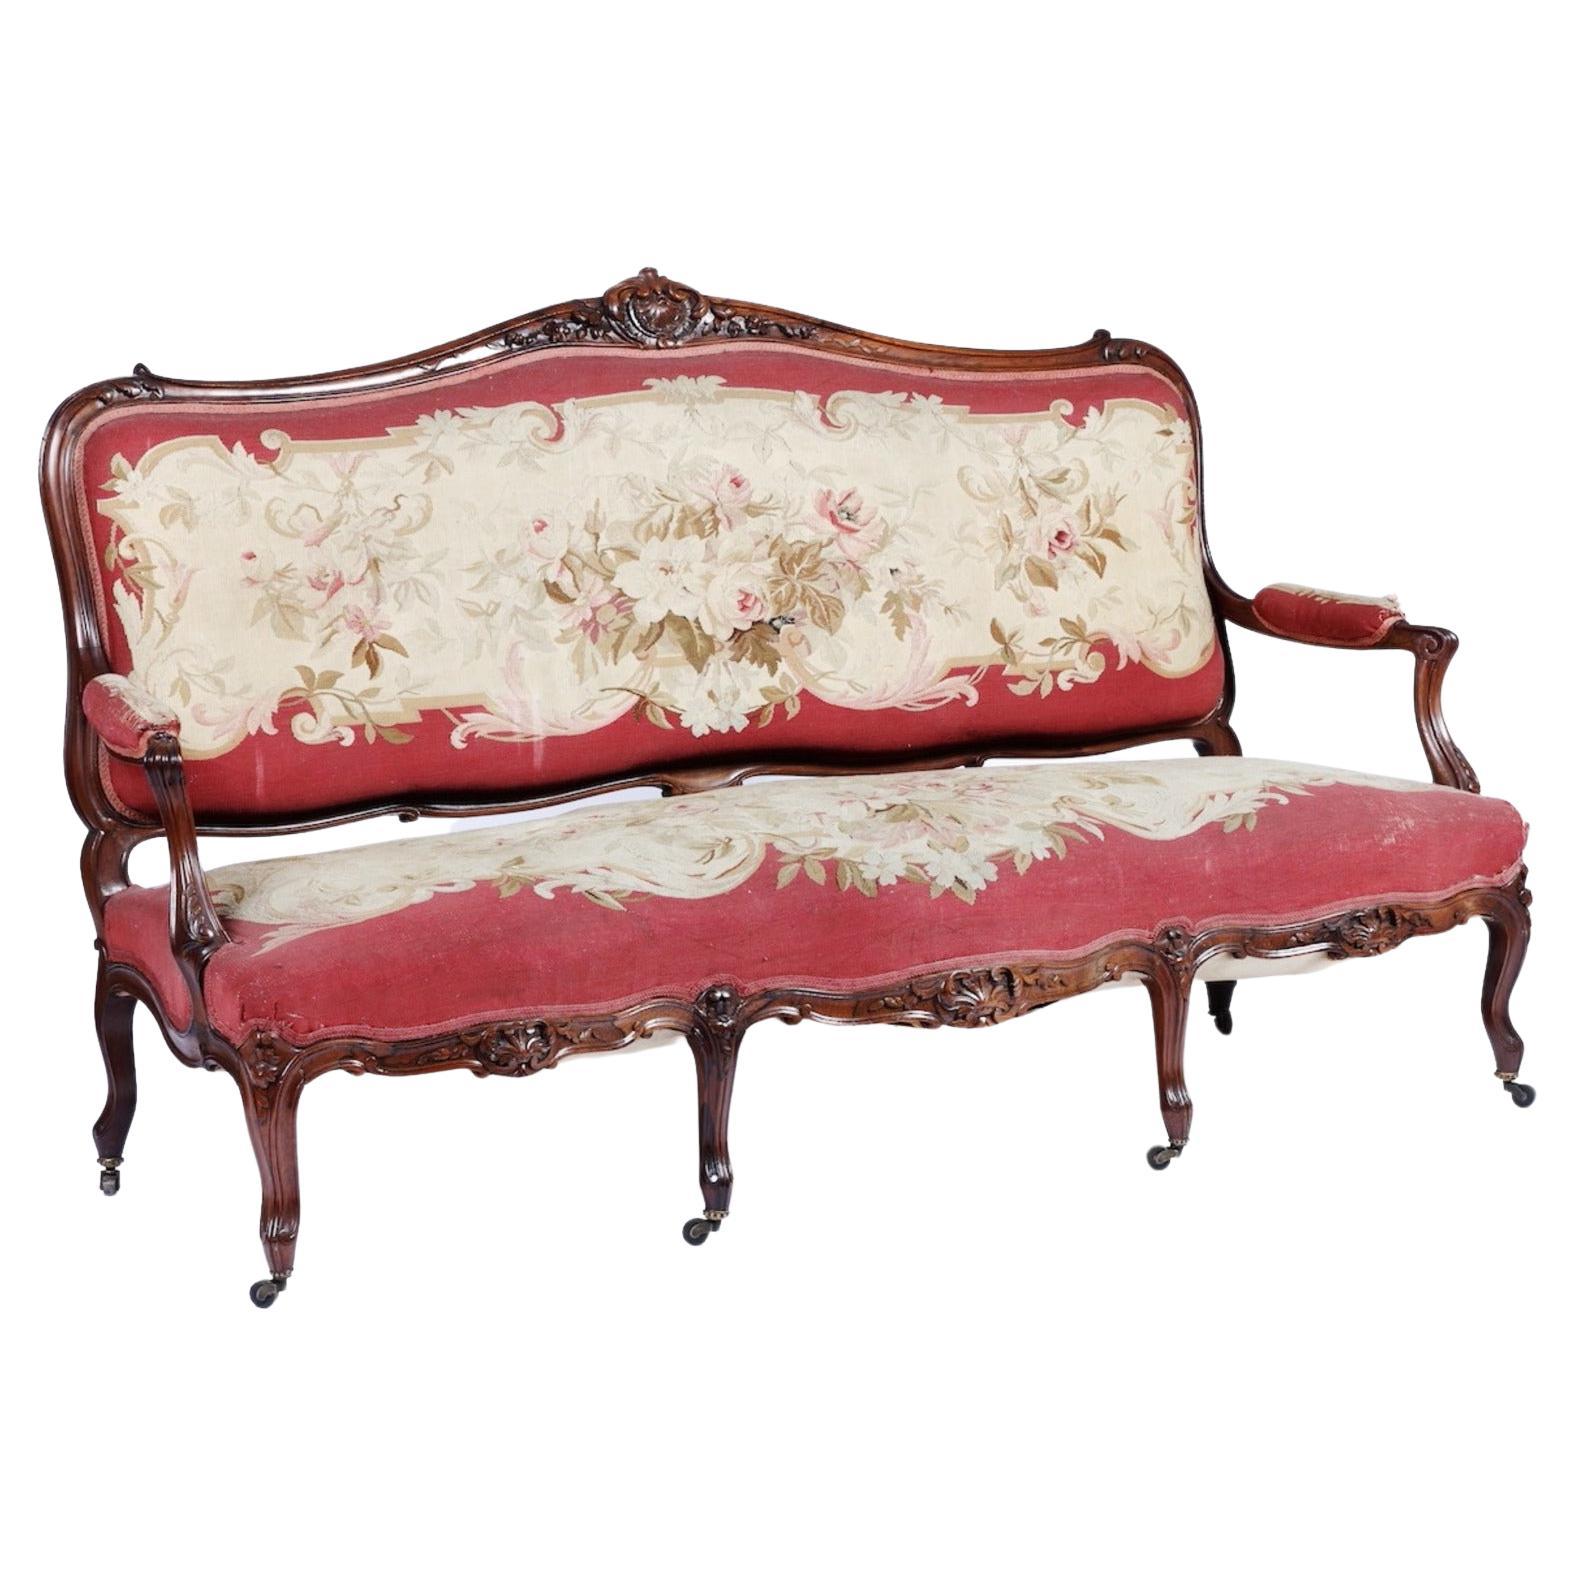 Canape Louis Philippe 19th Century Upholstered and Covered with Aubusson Fabric